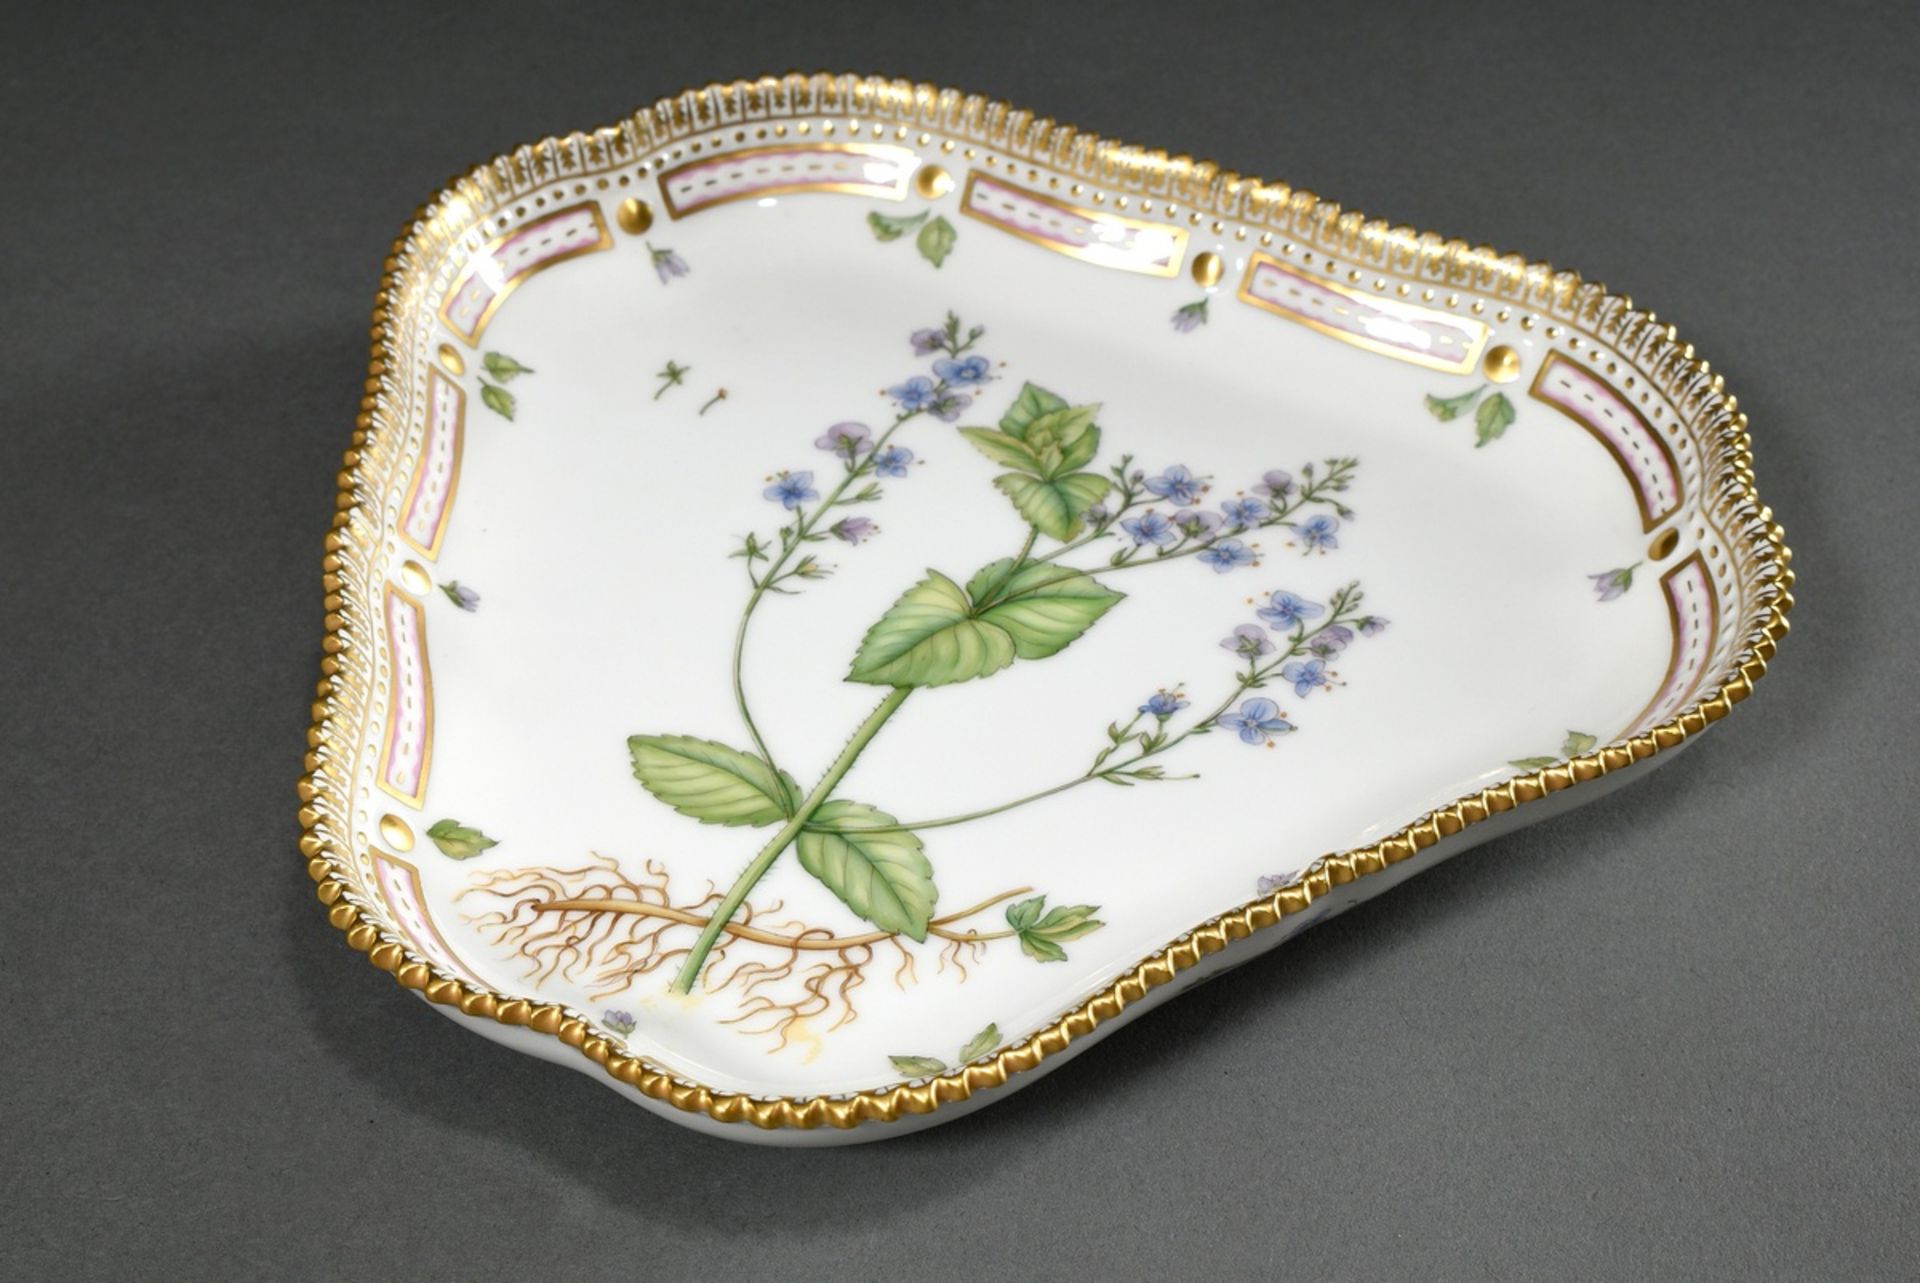 Small triangular Royal Copenhagen "Flora Danica" plate with polychrome painting in the mirror and g